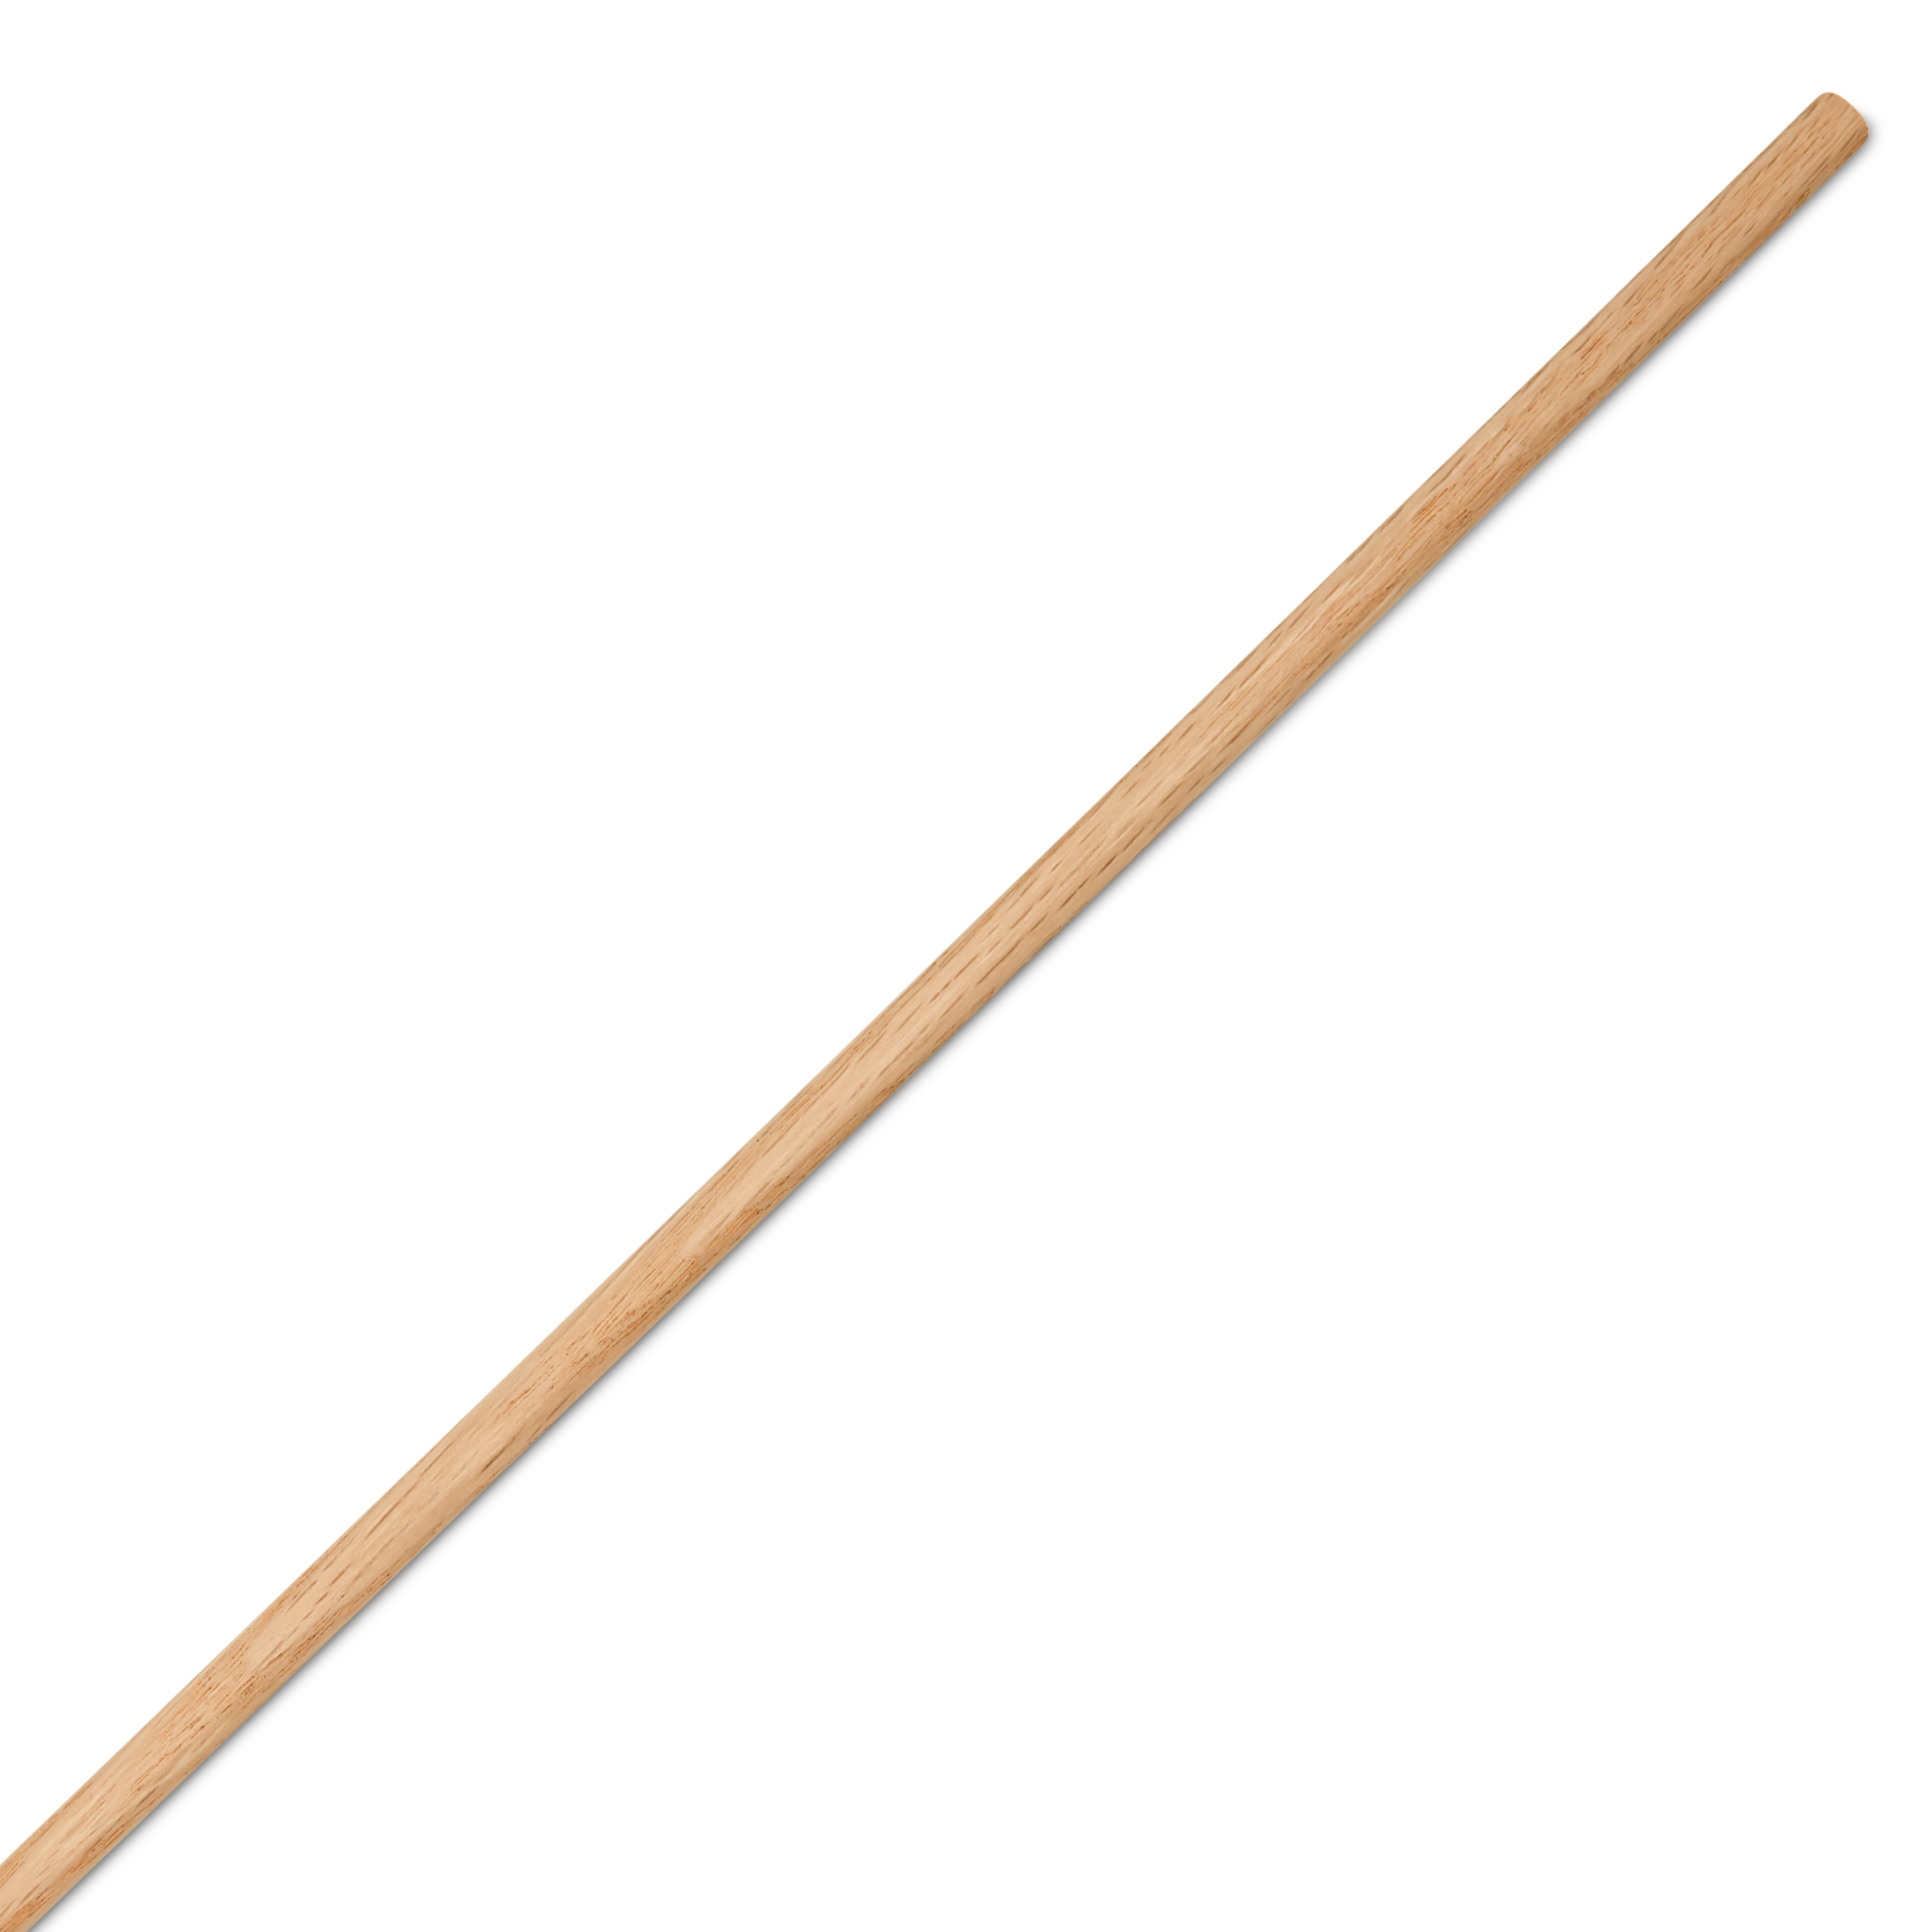 Dowel Rods Wood Sticks Wooden Dowel Rods - 1/4 x 36 Inch Unfinished  Hardwood Sticks - for Crafts and DIYers - 25 Pieces by Woodpeckers